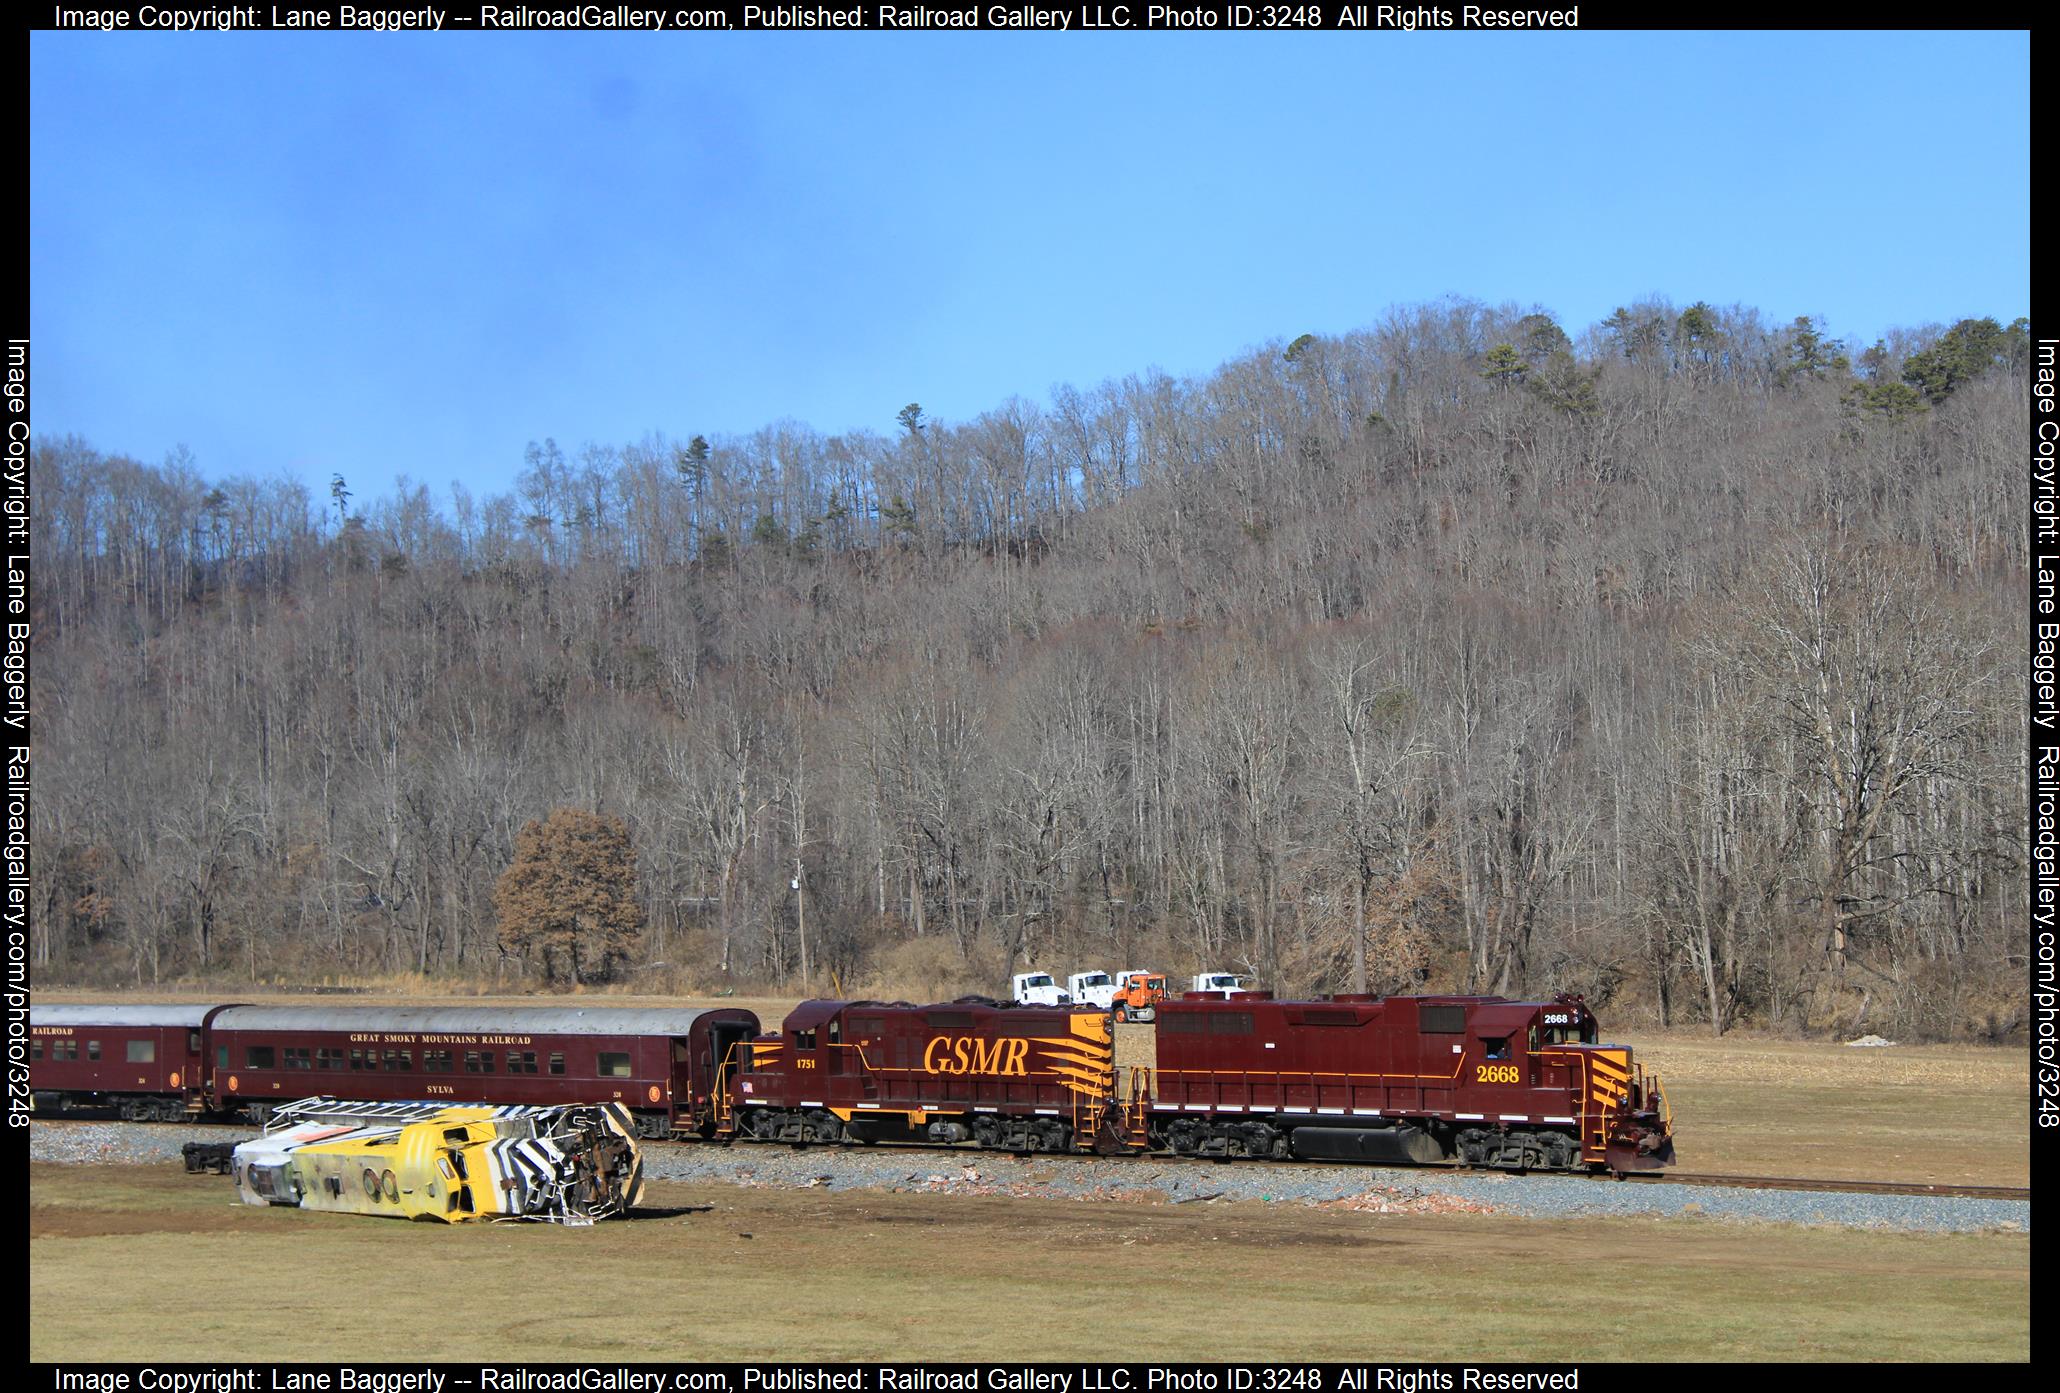 GSMR 2668 is a class EMD GP38-2 and  is pictured in Whitter, North Carolina, United States.  This was taken along the Murphy Branch on the Great Smoky Mountain . Photo Copyright: Lane Baggerly uploaded to Railroad Gallery on 04/02/2024. This photograph of GSMR 2668 was taken on Wednesday, December 29, 2021. All Rights Reserved. 